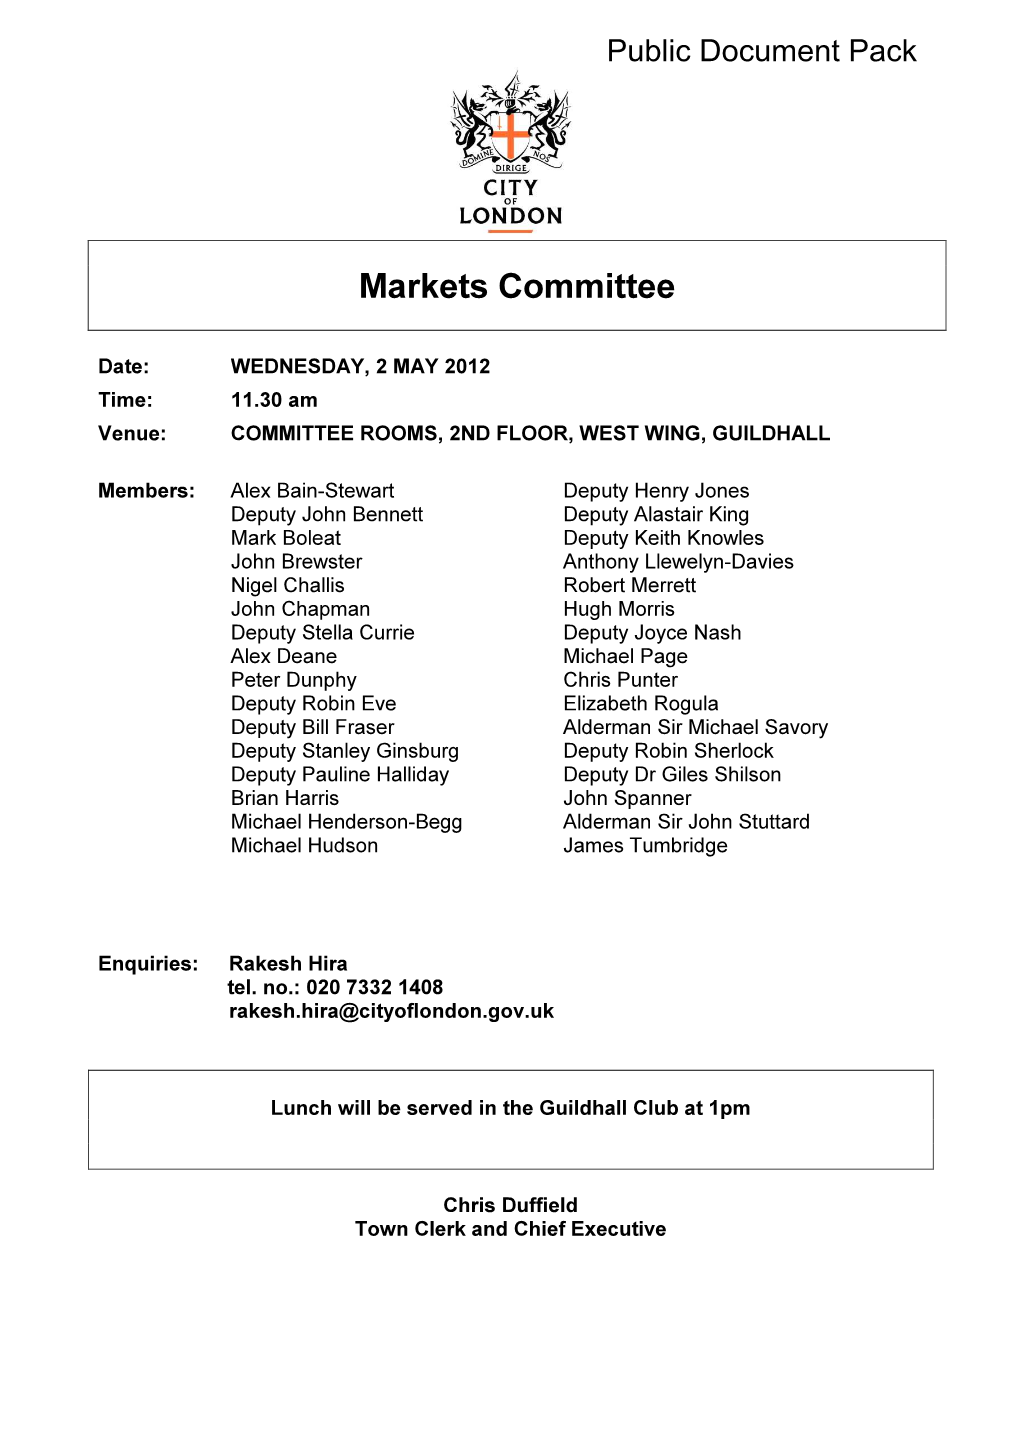 Markets Committee